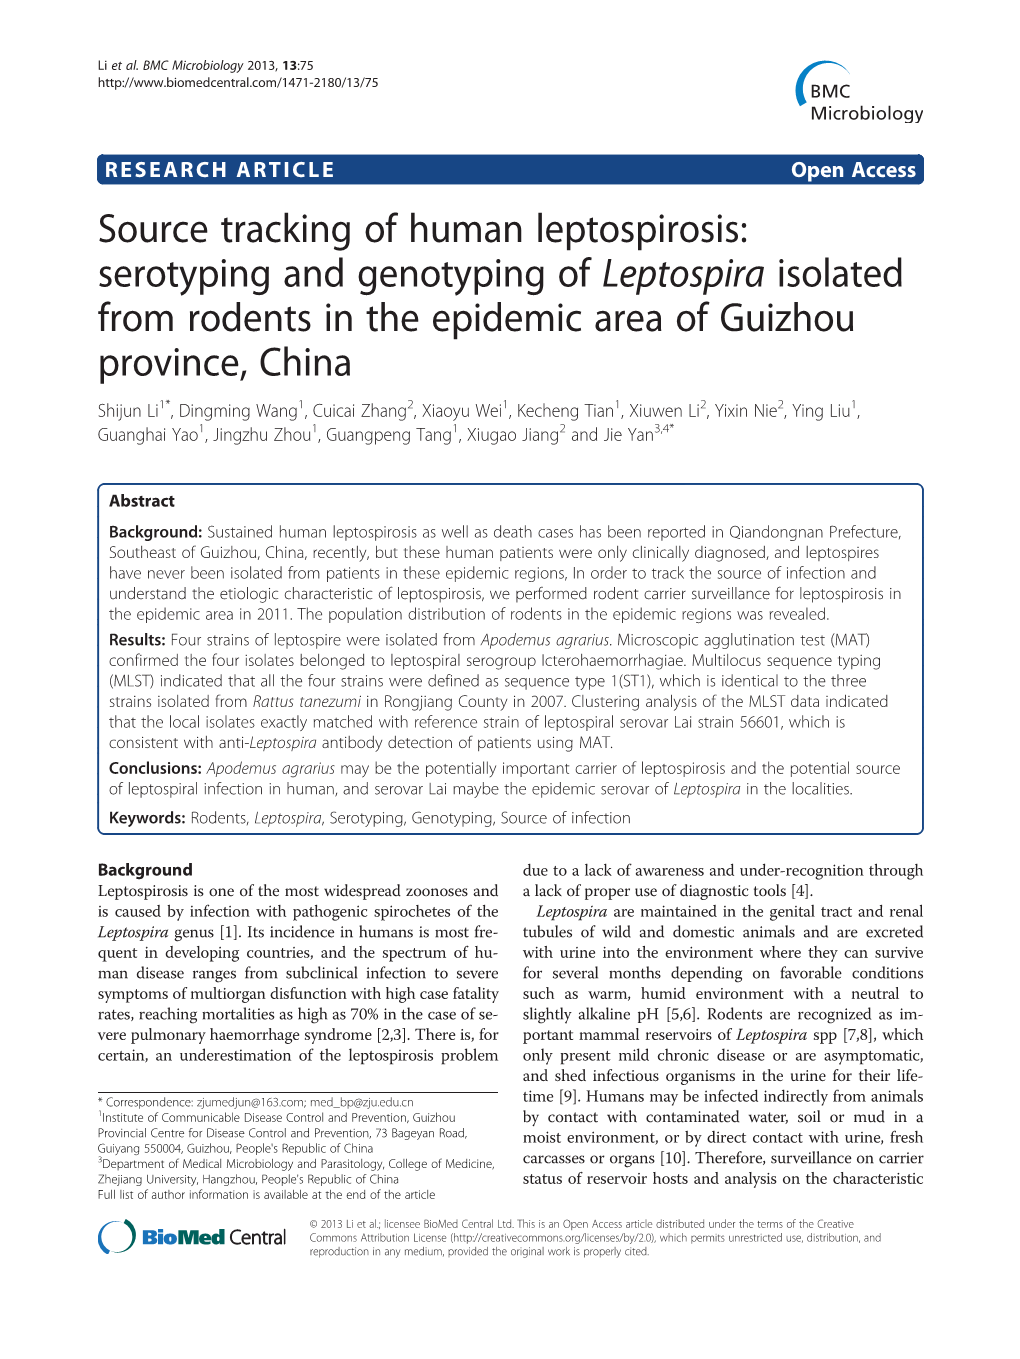 Source Tracking of Human Leptospirosis: Serotyping and Genotyping of Leptospira Isolated from Rodents in the Epidemic Area of Gu